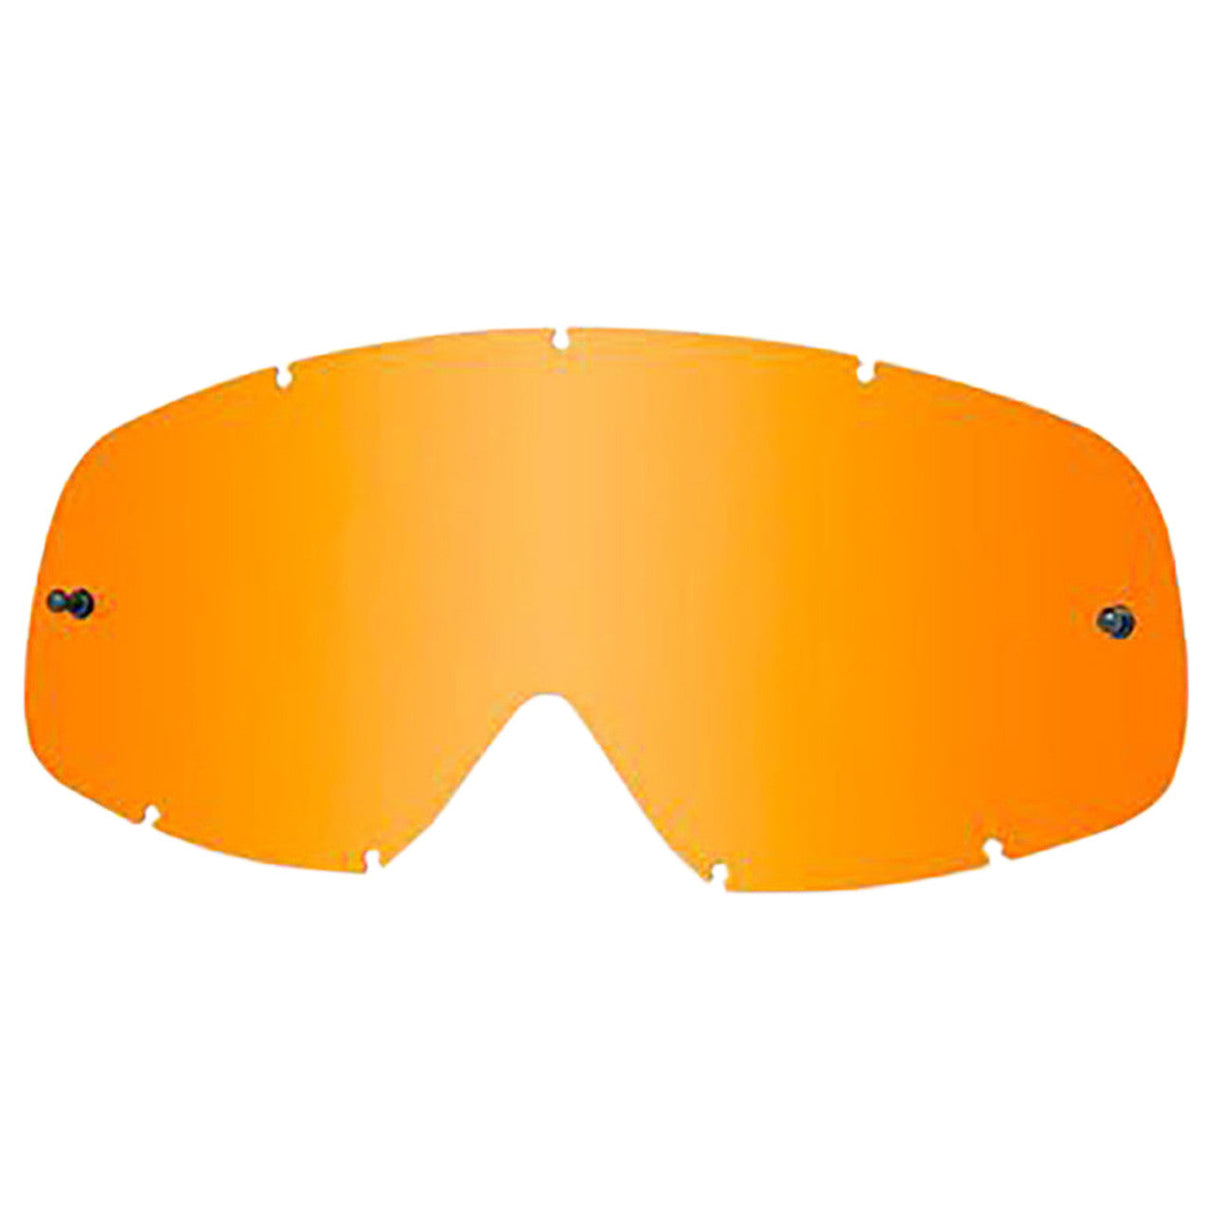 OAKLEY REPLACEMENT LENS O FRAME MX PERSIMMON